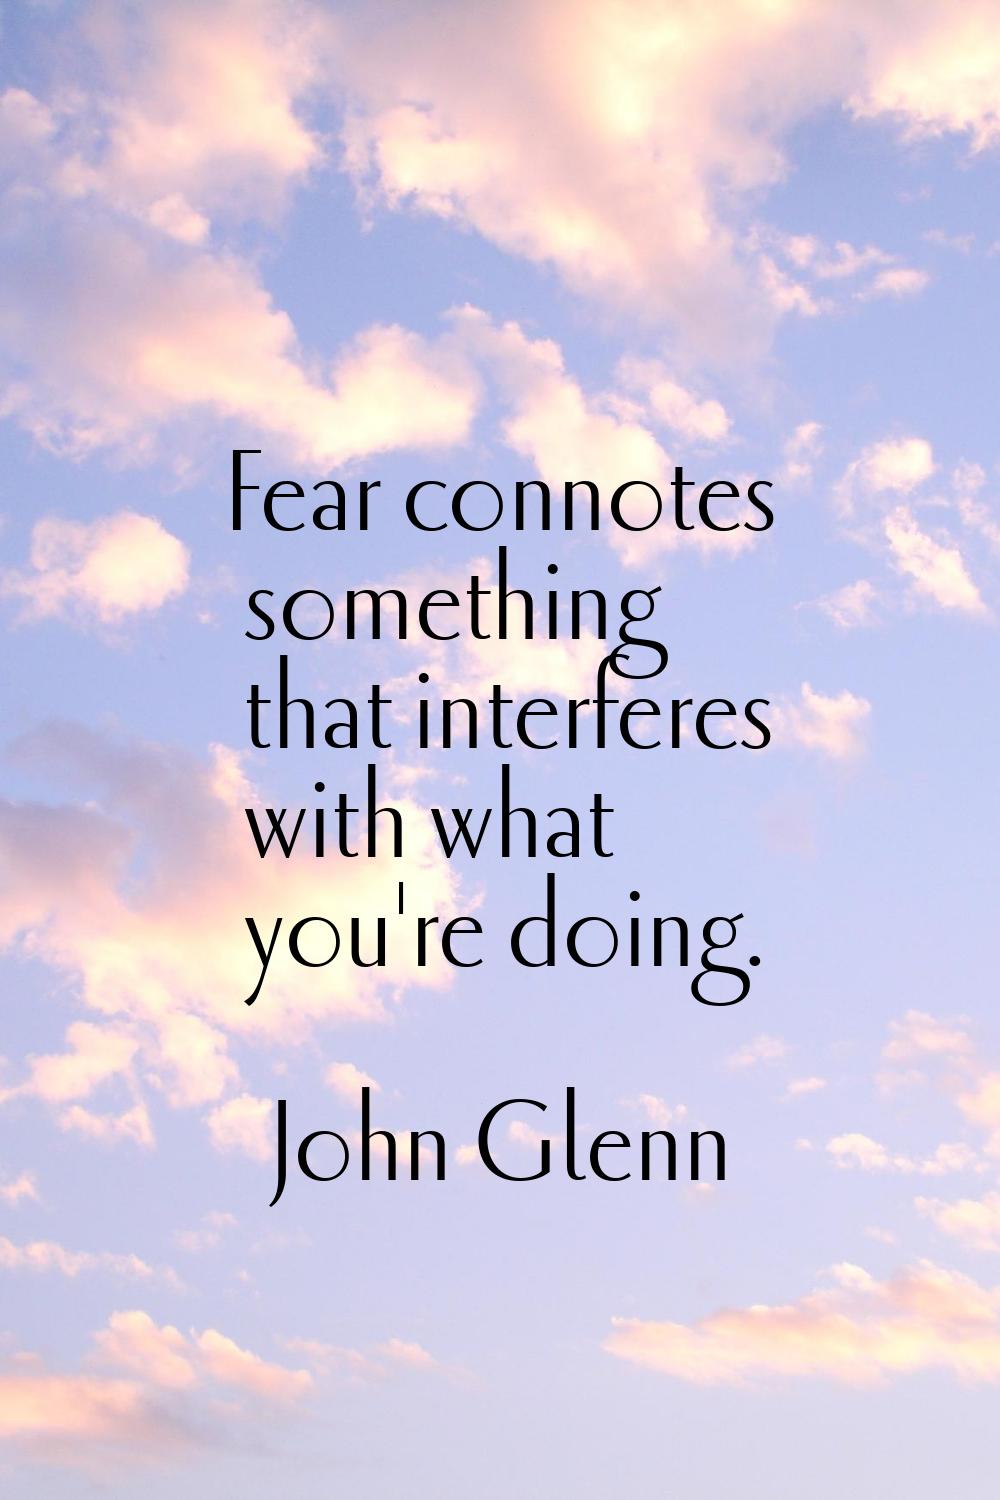 Fear connotes something that interferes with what you're doing.